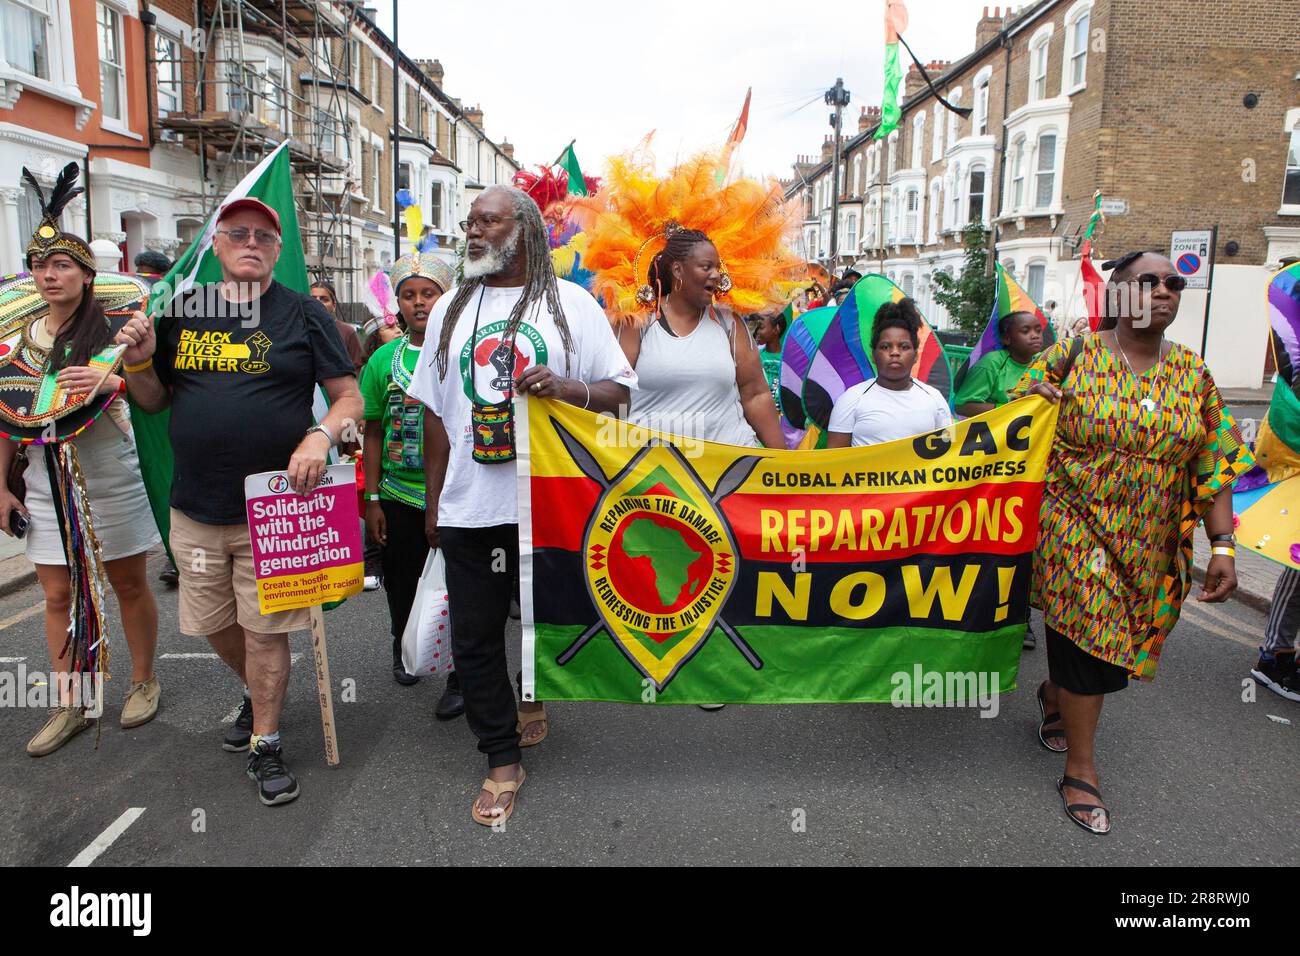 London, UK. 23rd June, 2023. A procession through Brixton, along Railton Road to Windrush Square, marked the 75th anniversary of the Empire Windrush docking at Tilbury. One of the banners carried called for reparations. Credit: Anna Watson/Alamy Live News Stock Photo